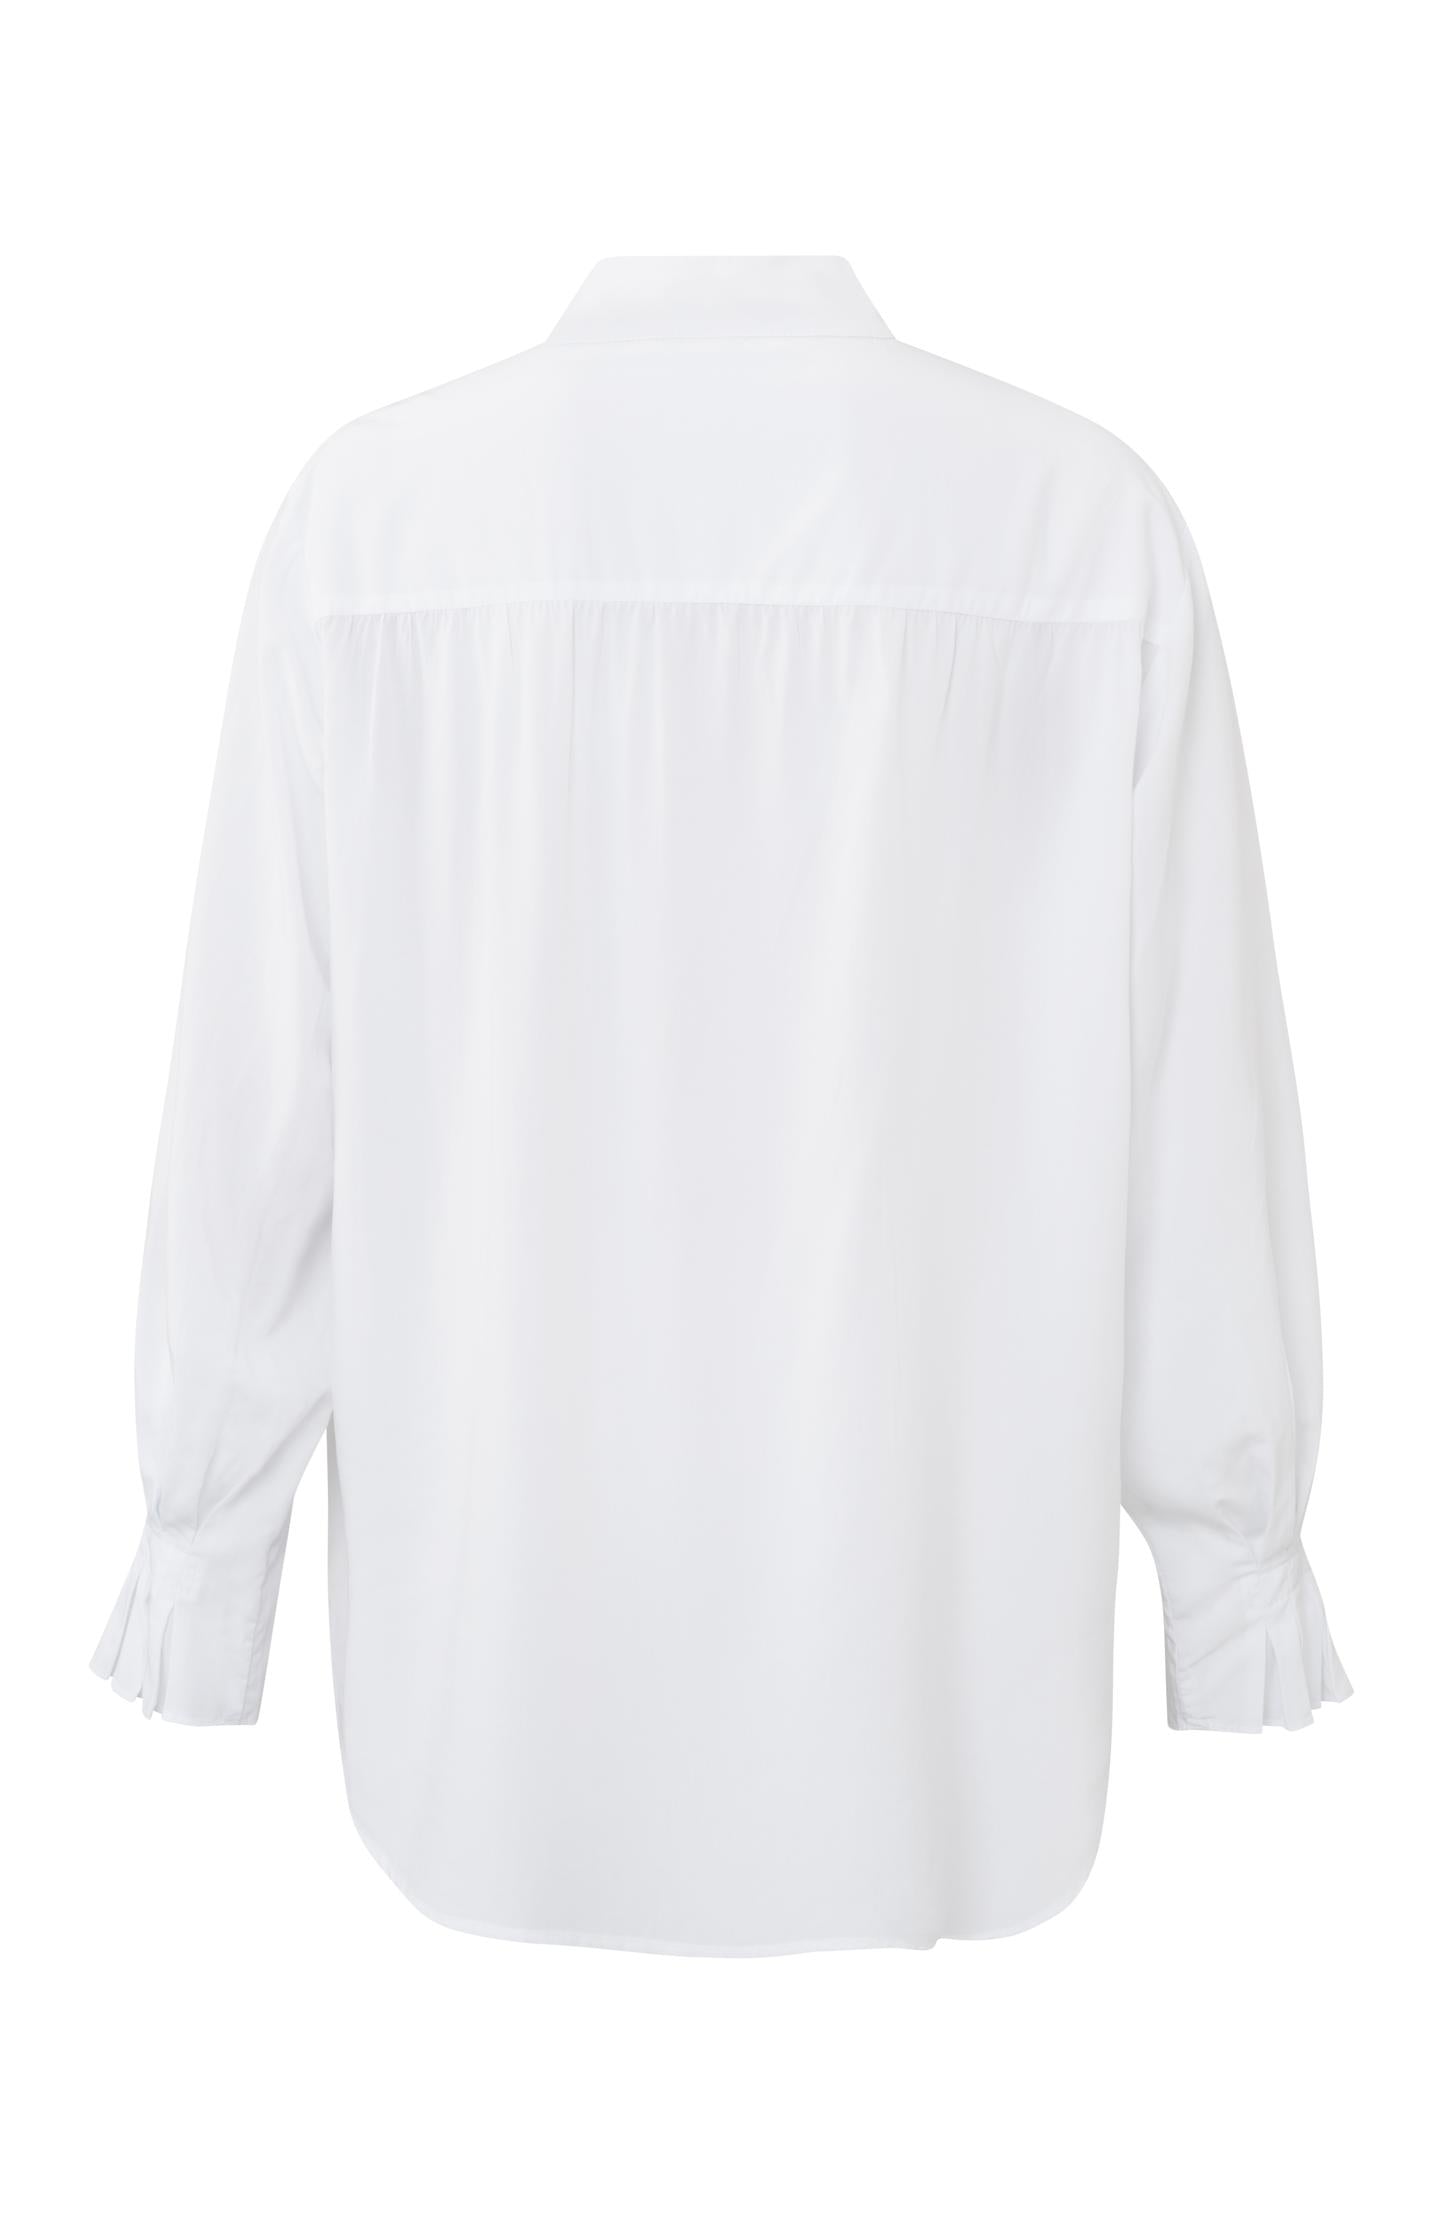 Top with V-neck, high neck and long pleated sleeves